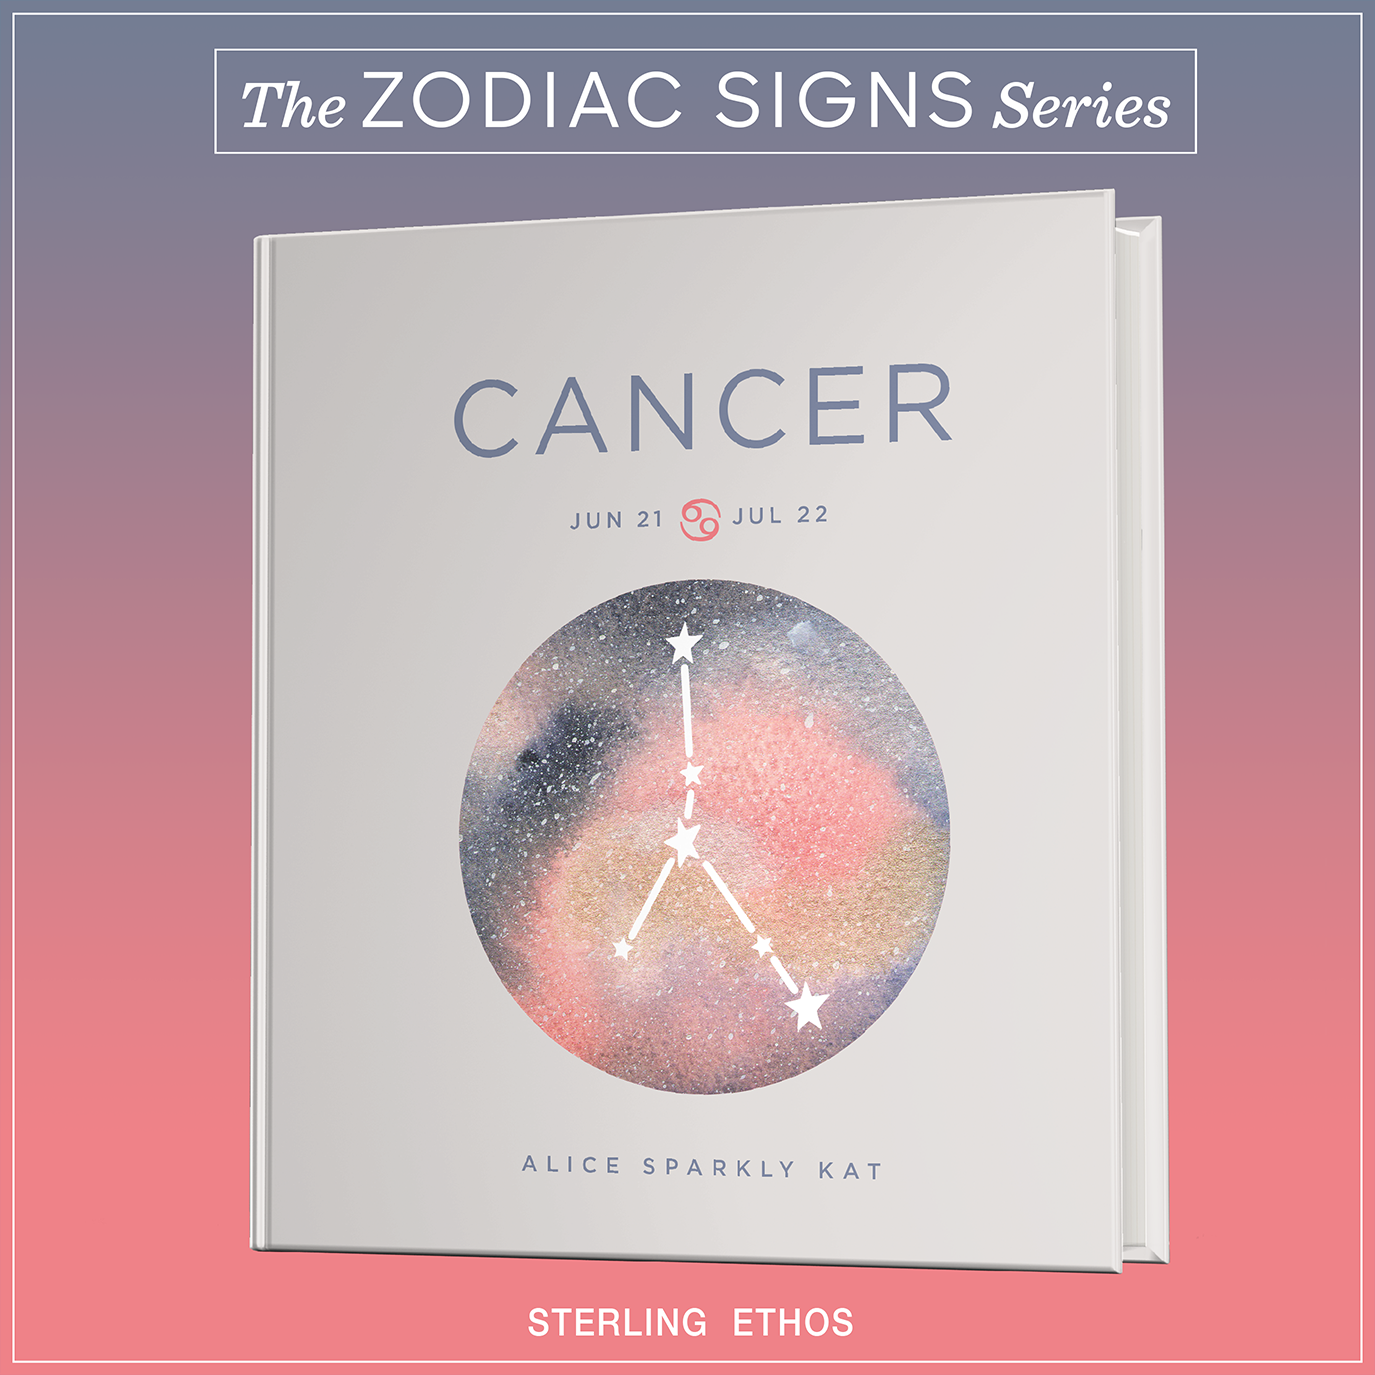 Zodiac Signs: Cancer by Alice Sparkly Kat